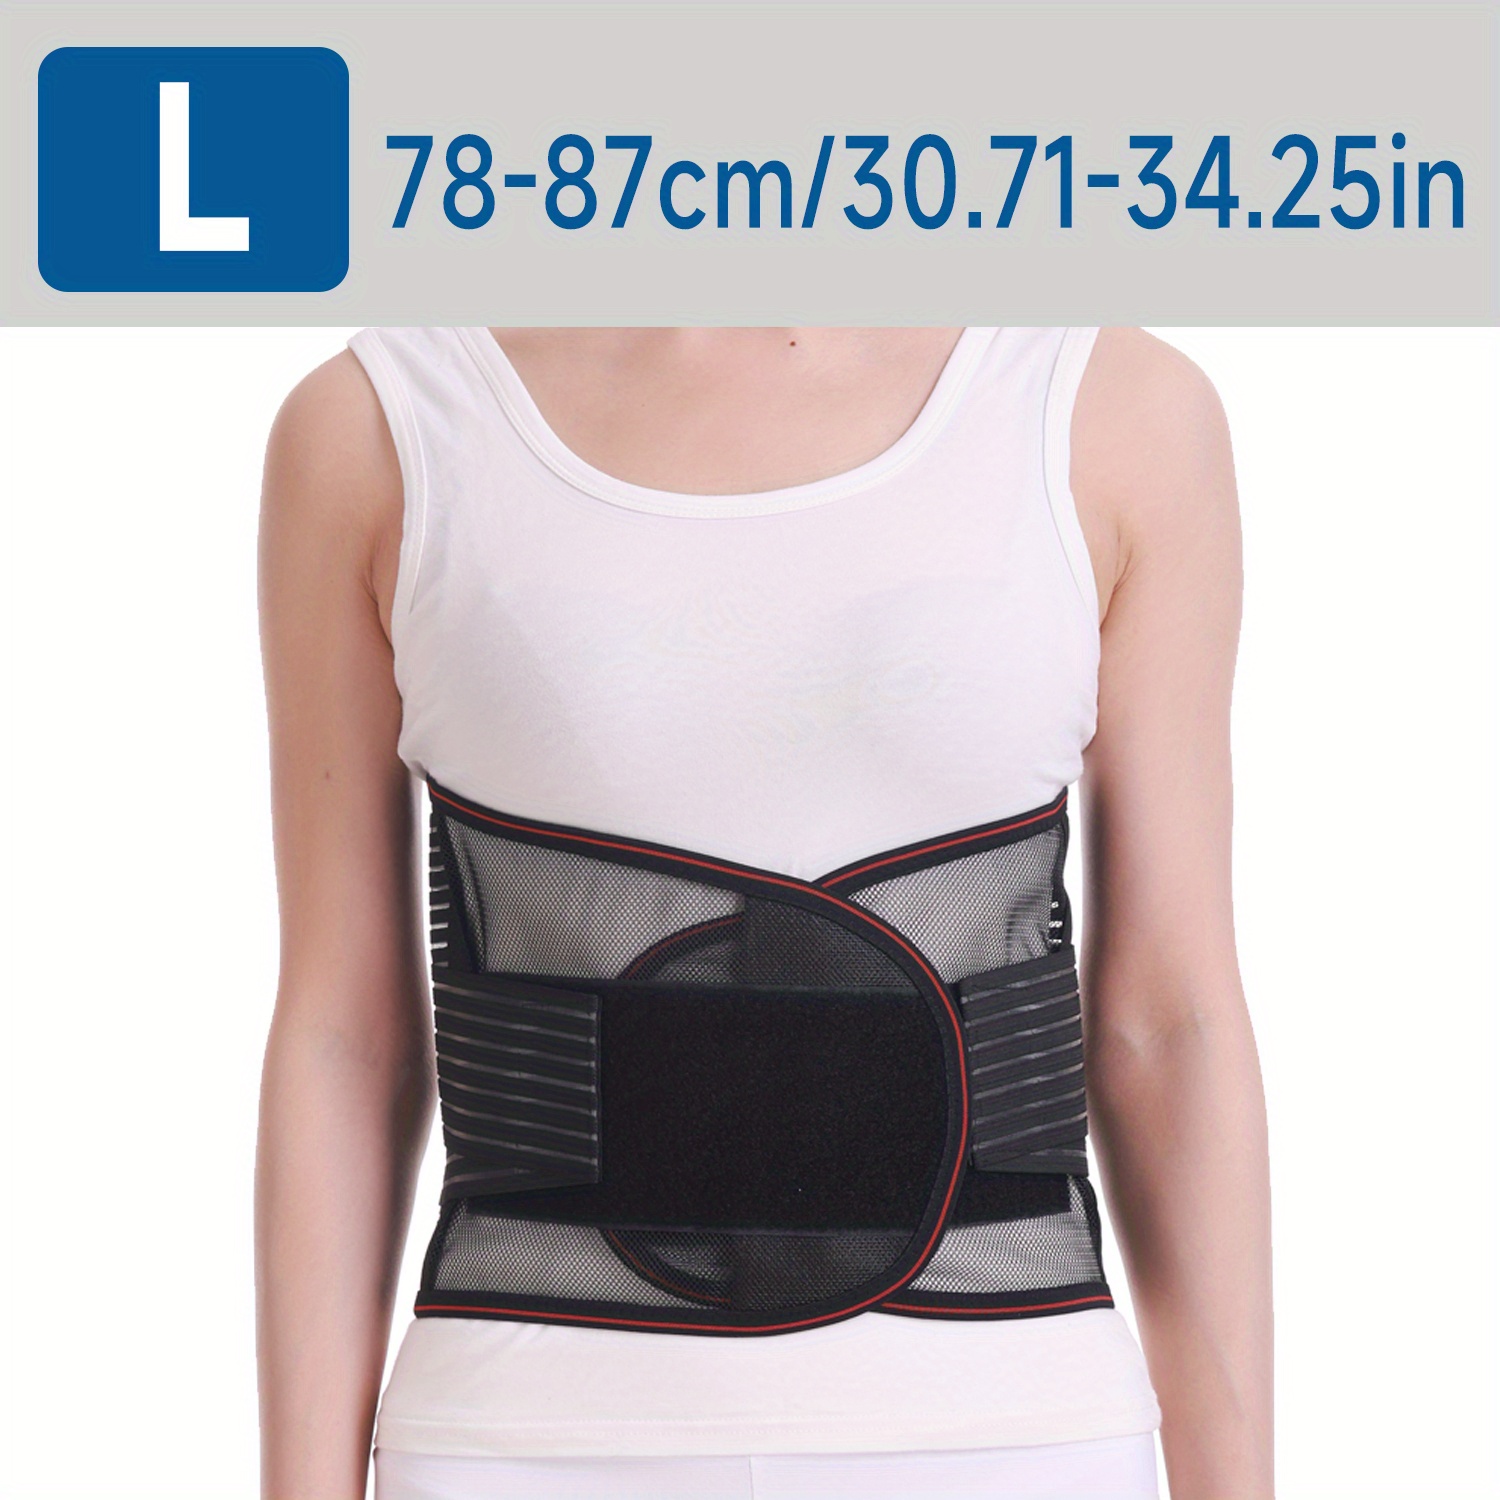 Waist Trainer for Women Lower Belly Fat, Waist Wraps for Stomach